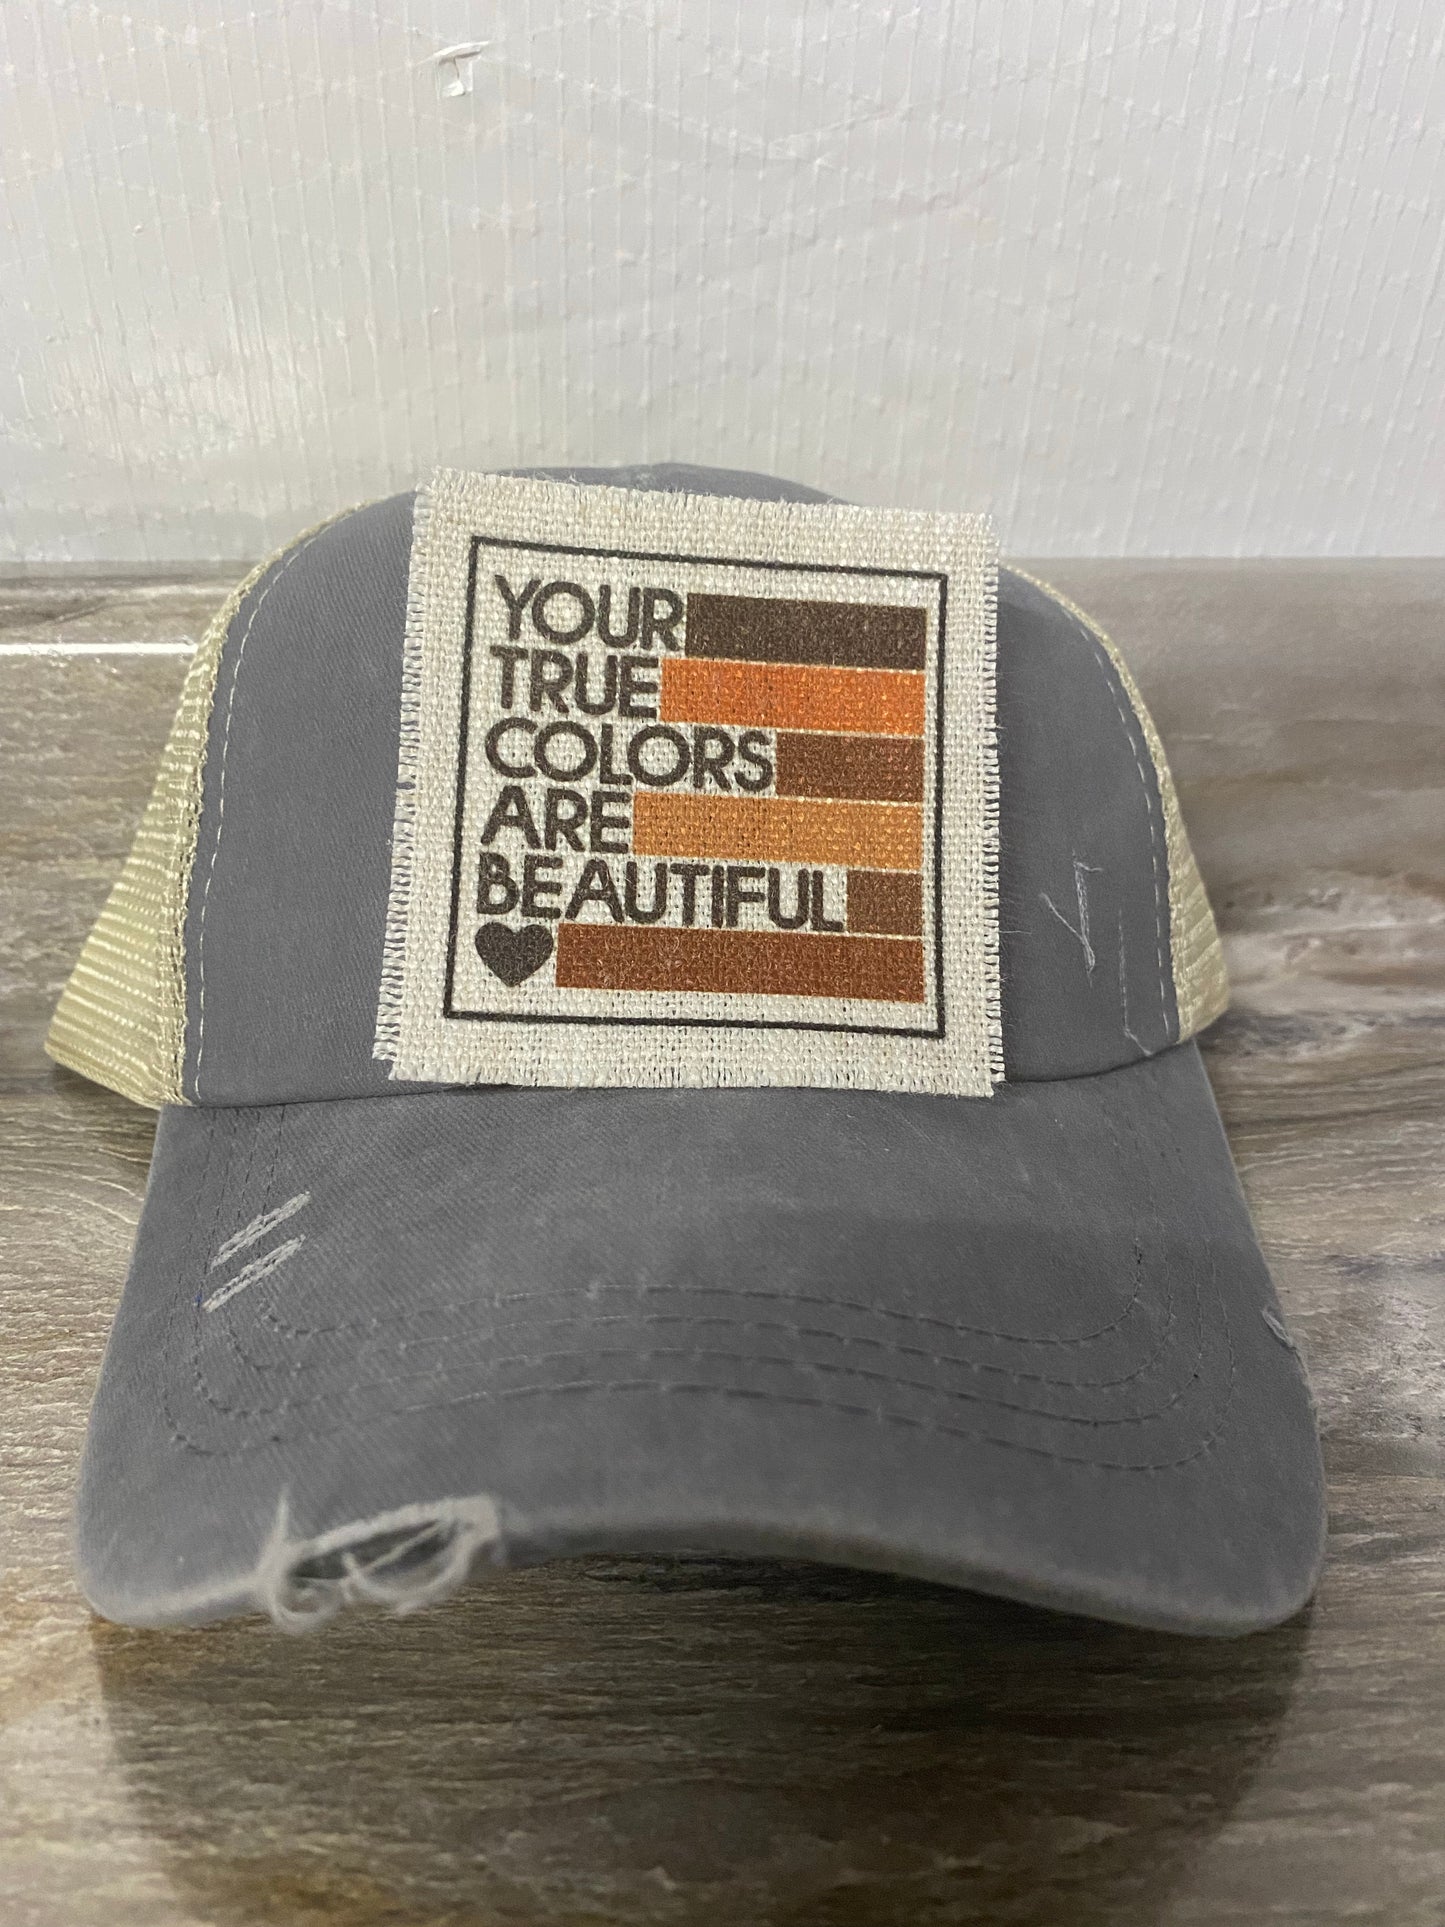 Your True Colors Are Beautiful Races Hat Patch